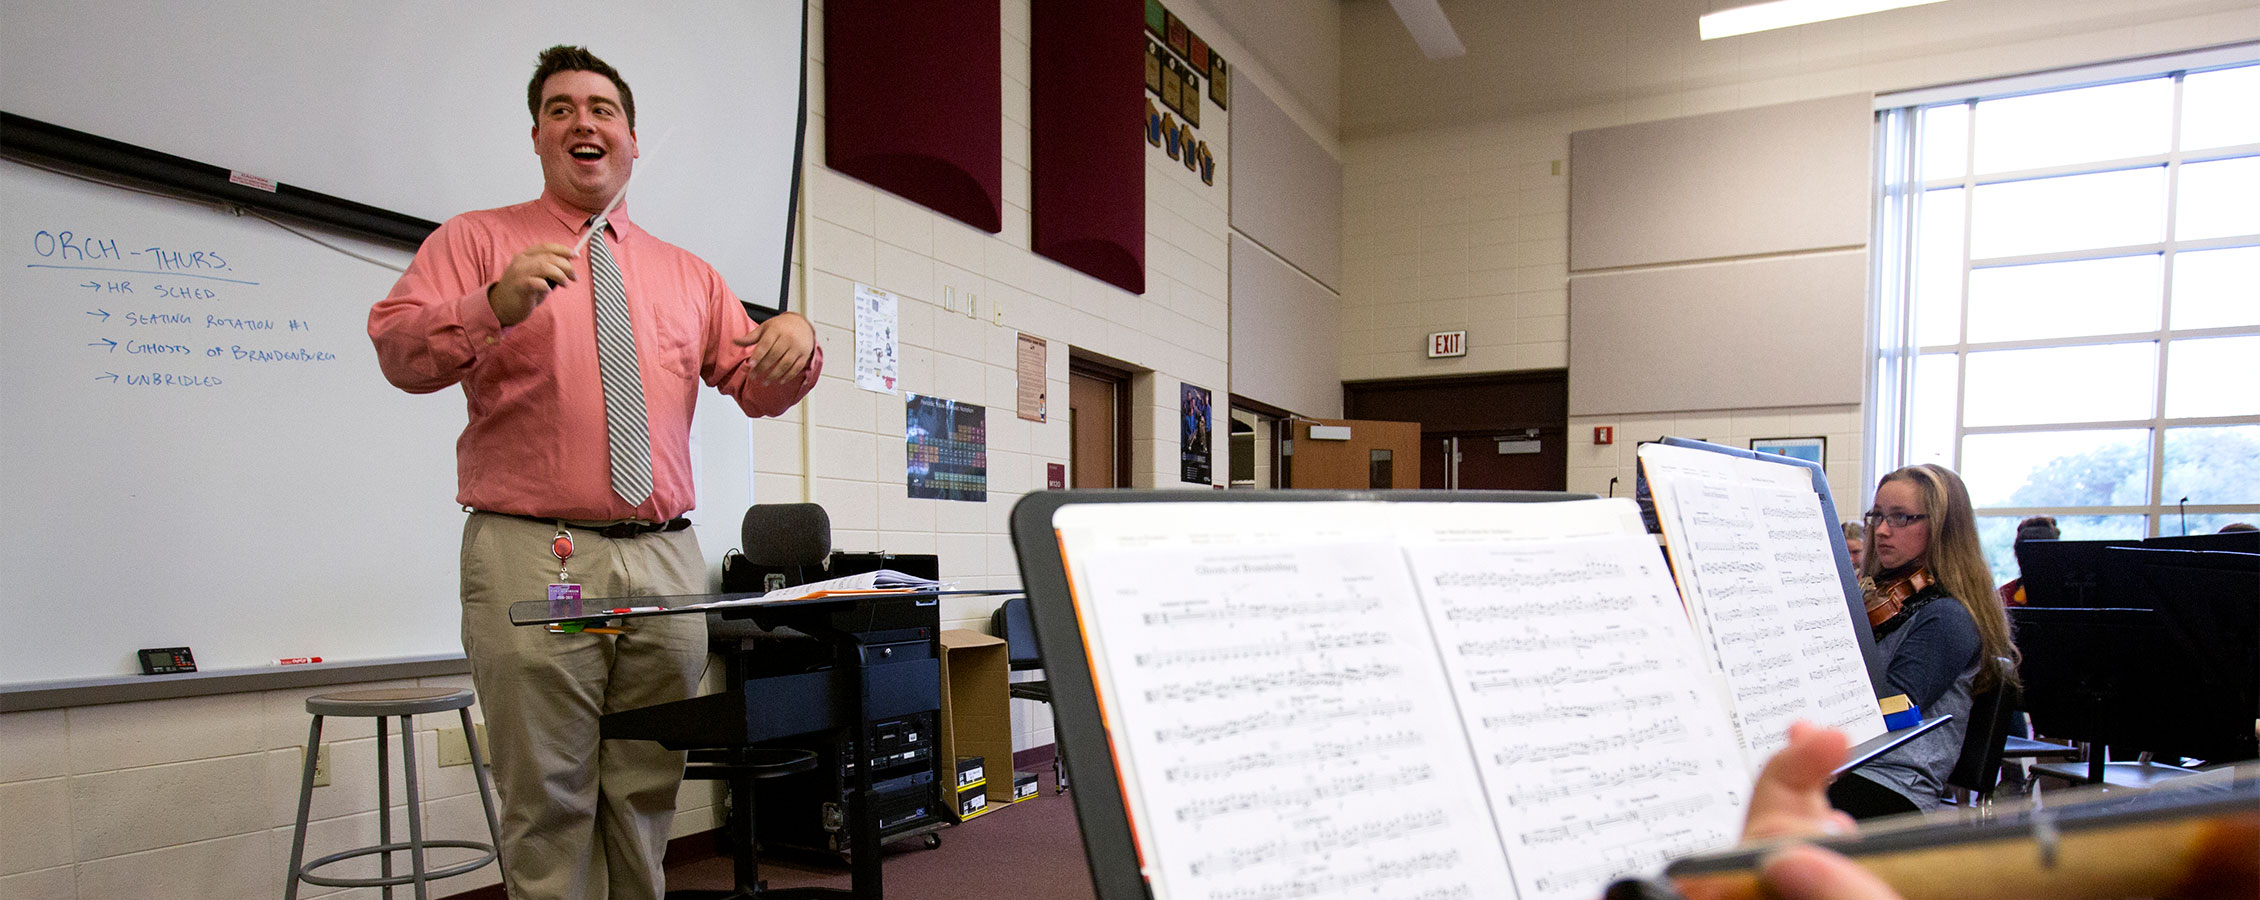 Middle school music teacher conducts band members.